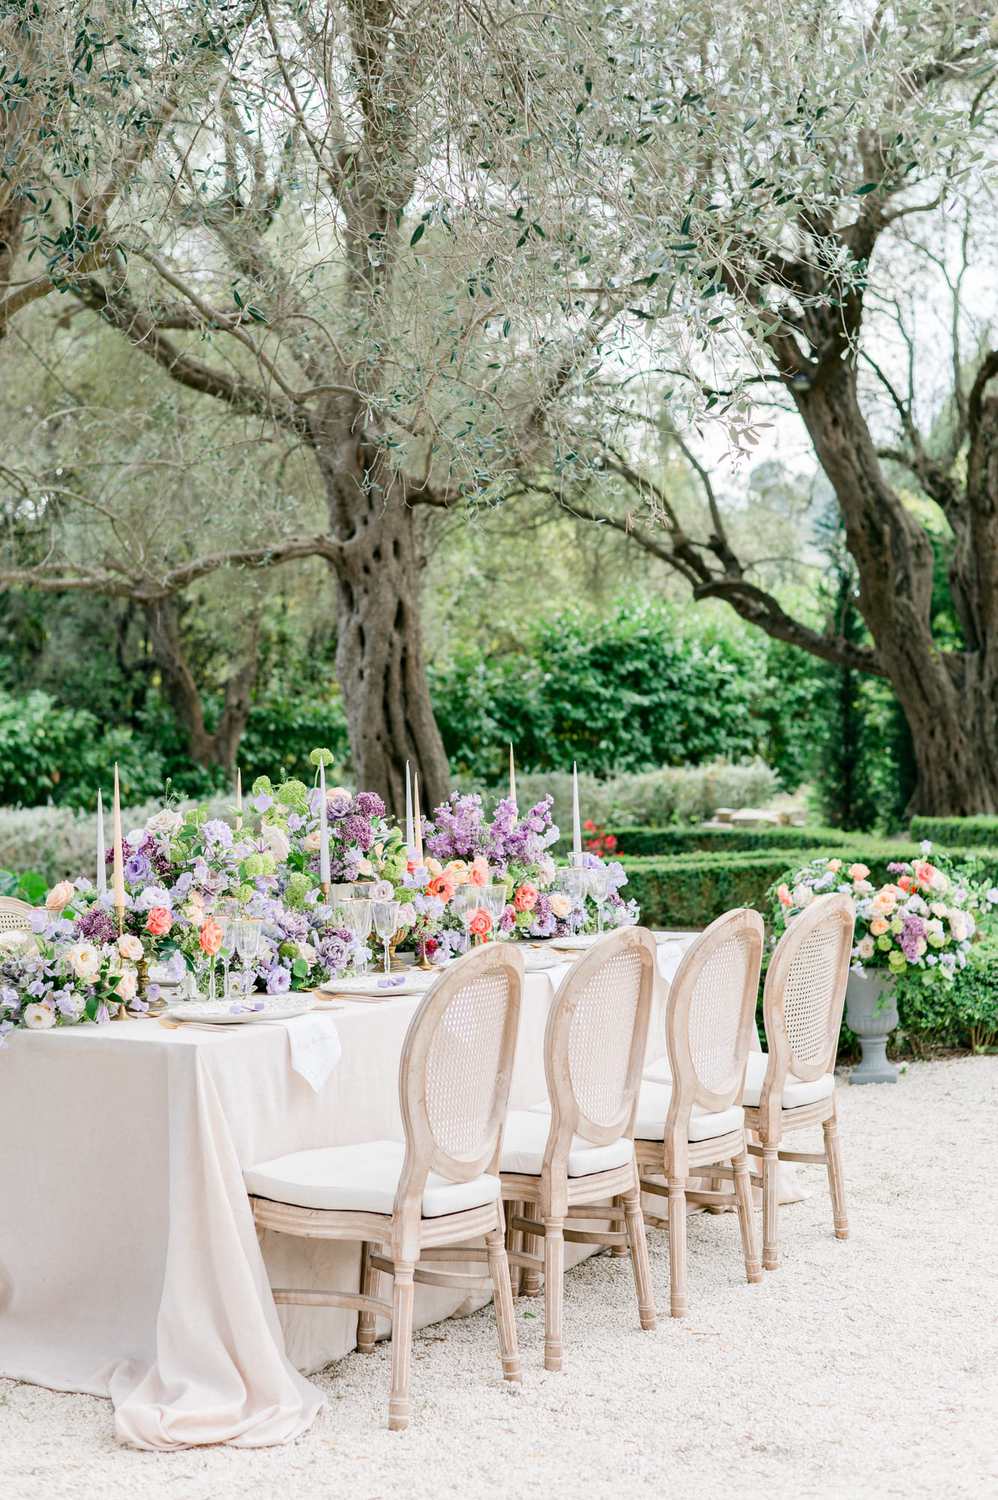 Wedding table in Provence